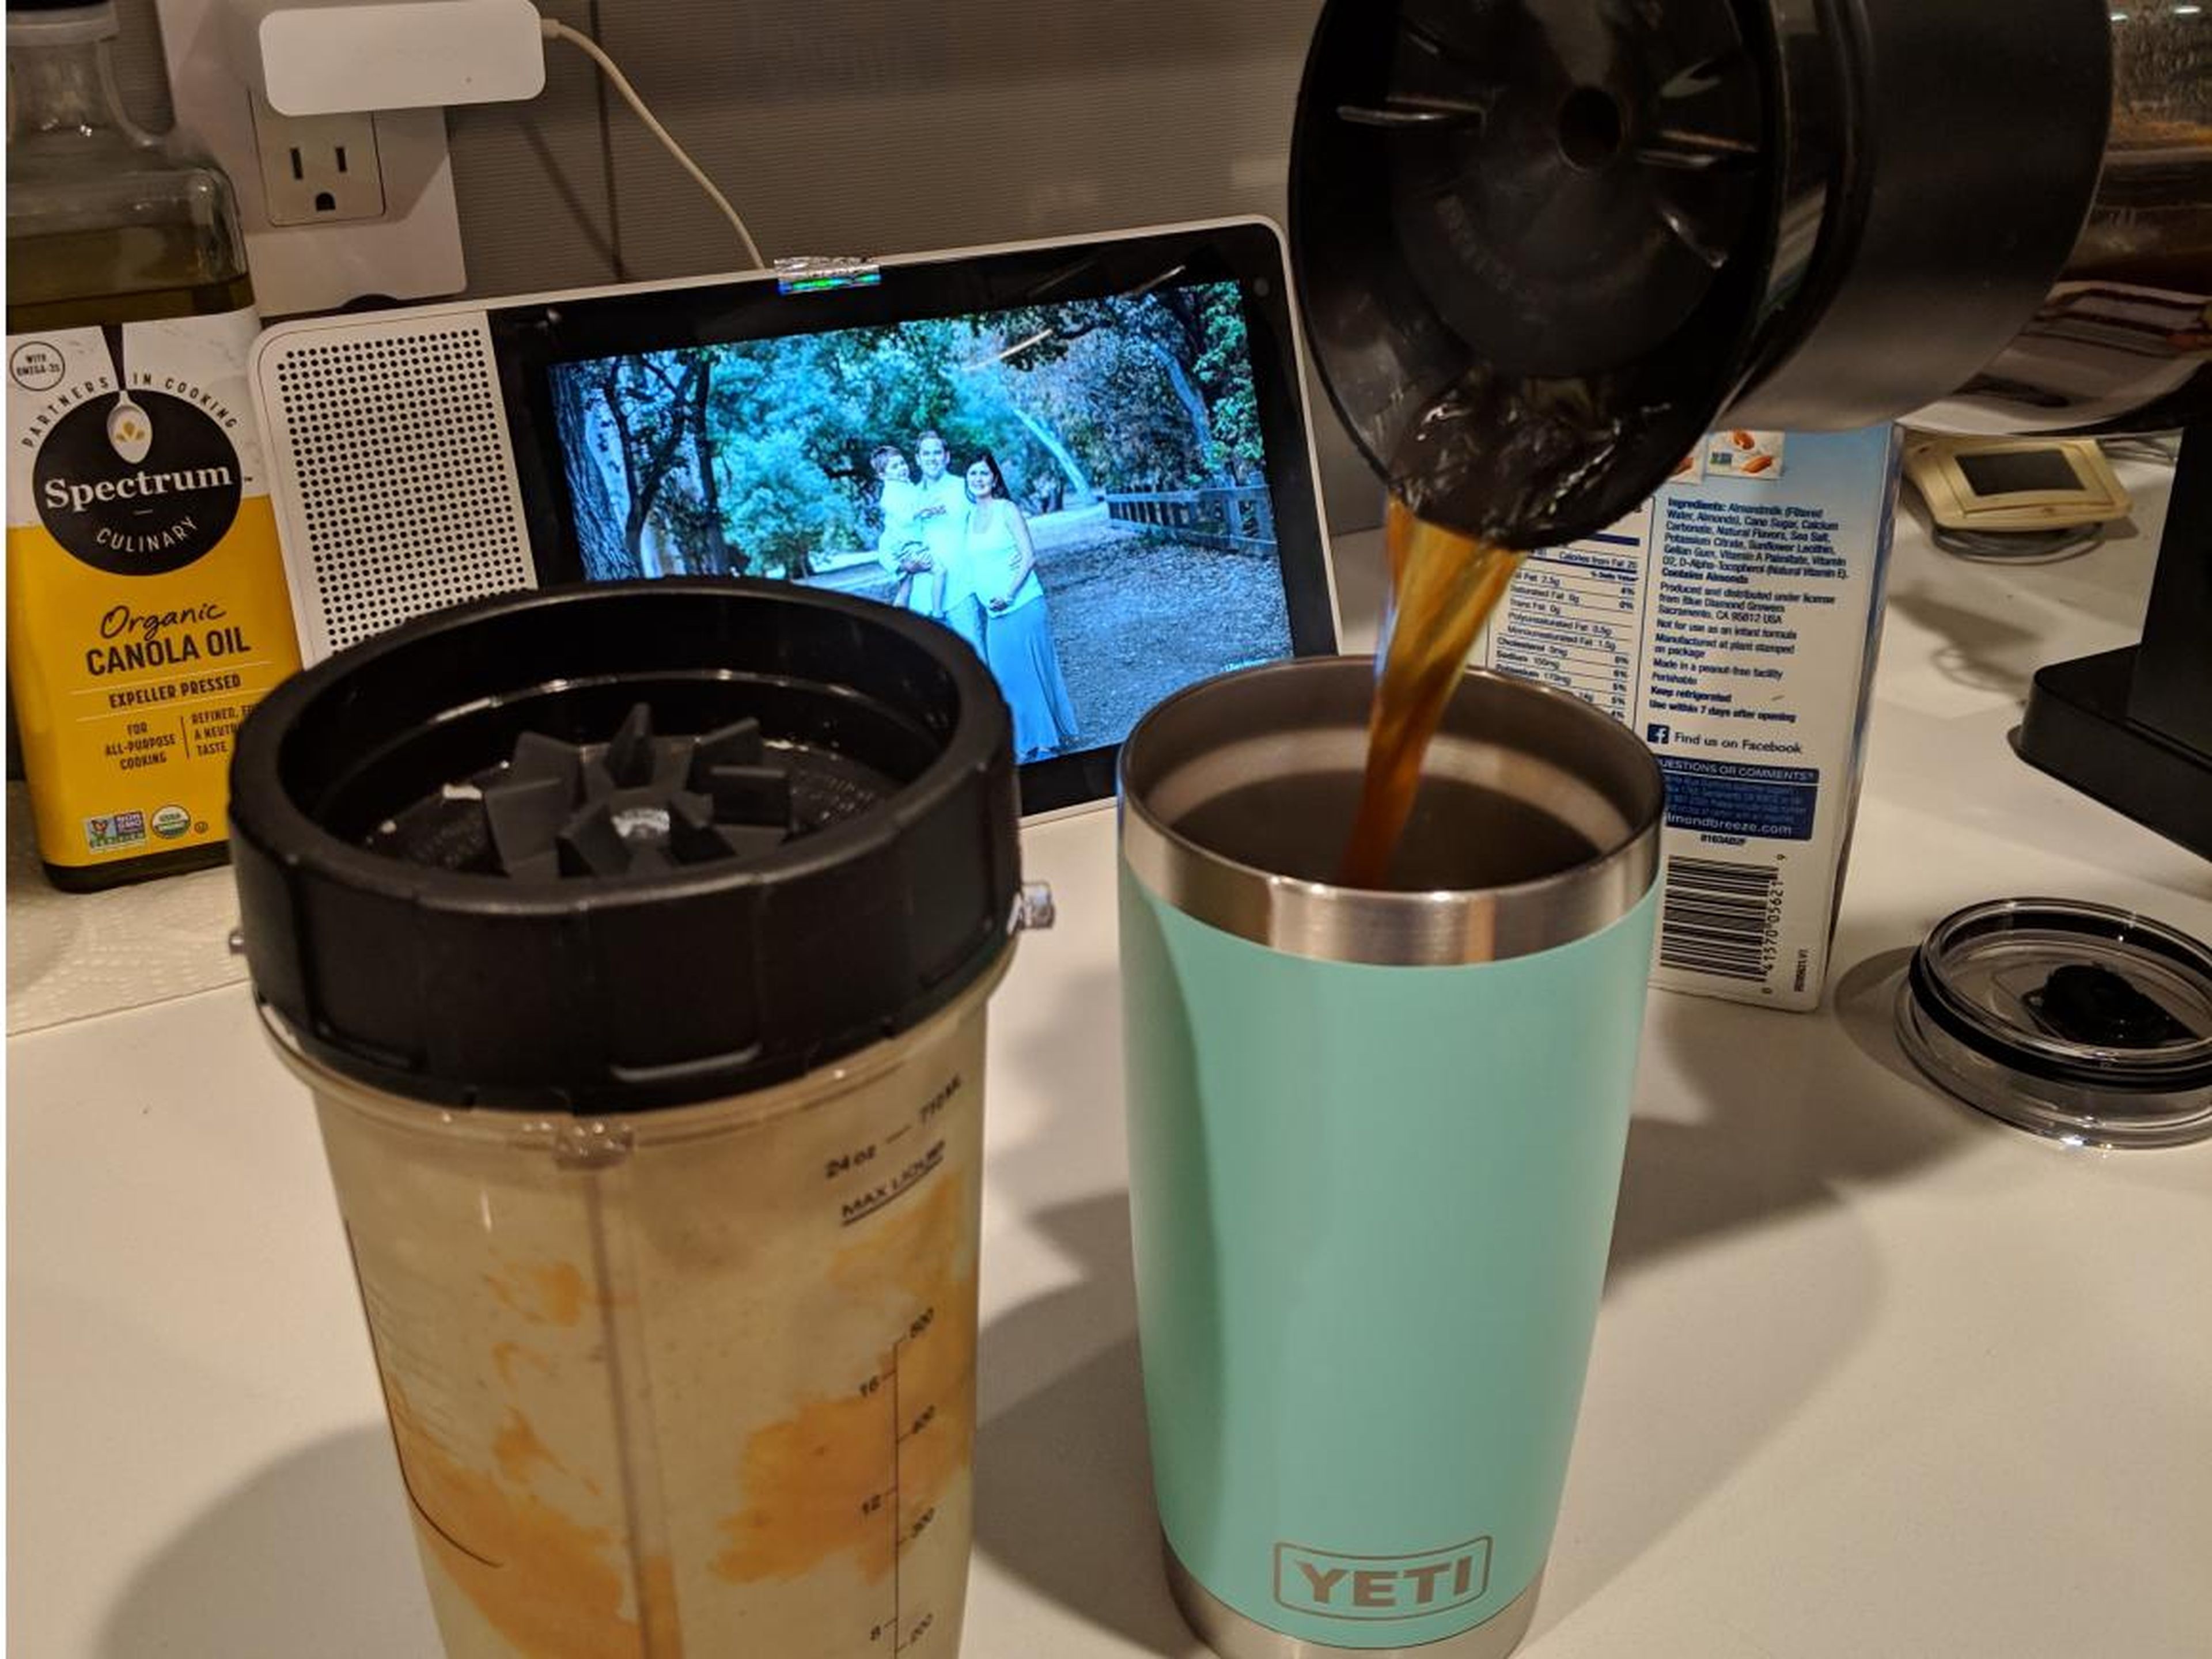 When she has the time, she makes a protein shake with peanut butter, almond milk, bananas, and kale to get a healthy start to her day. She takes it in the car with her, along with her coffee.